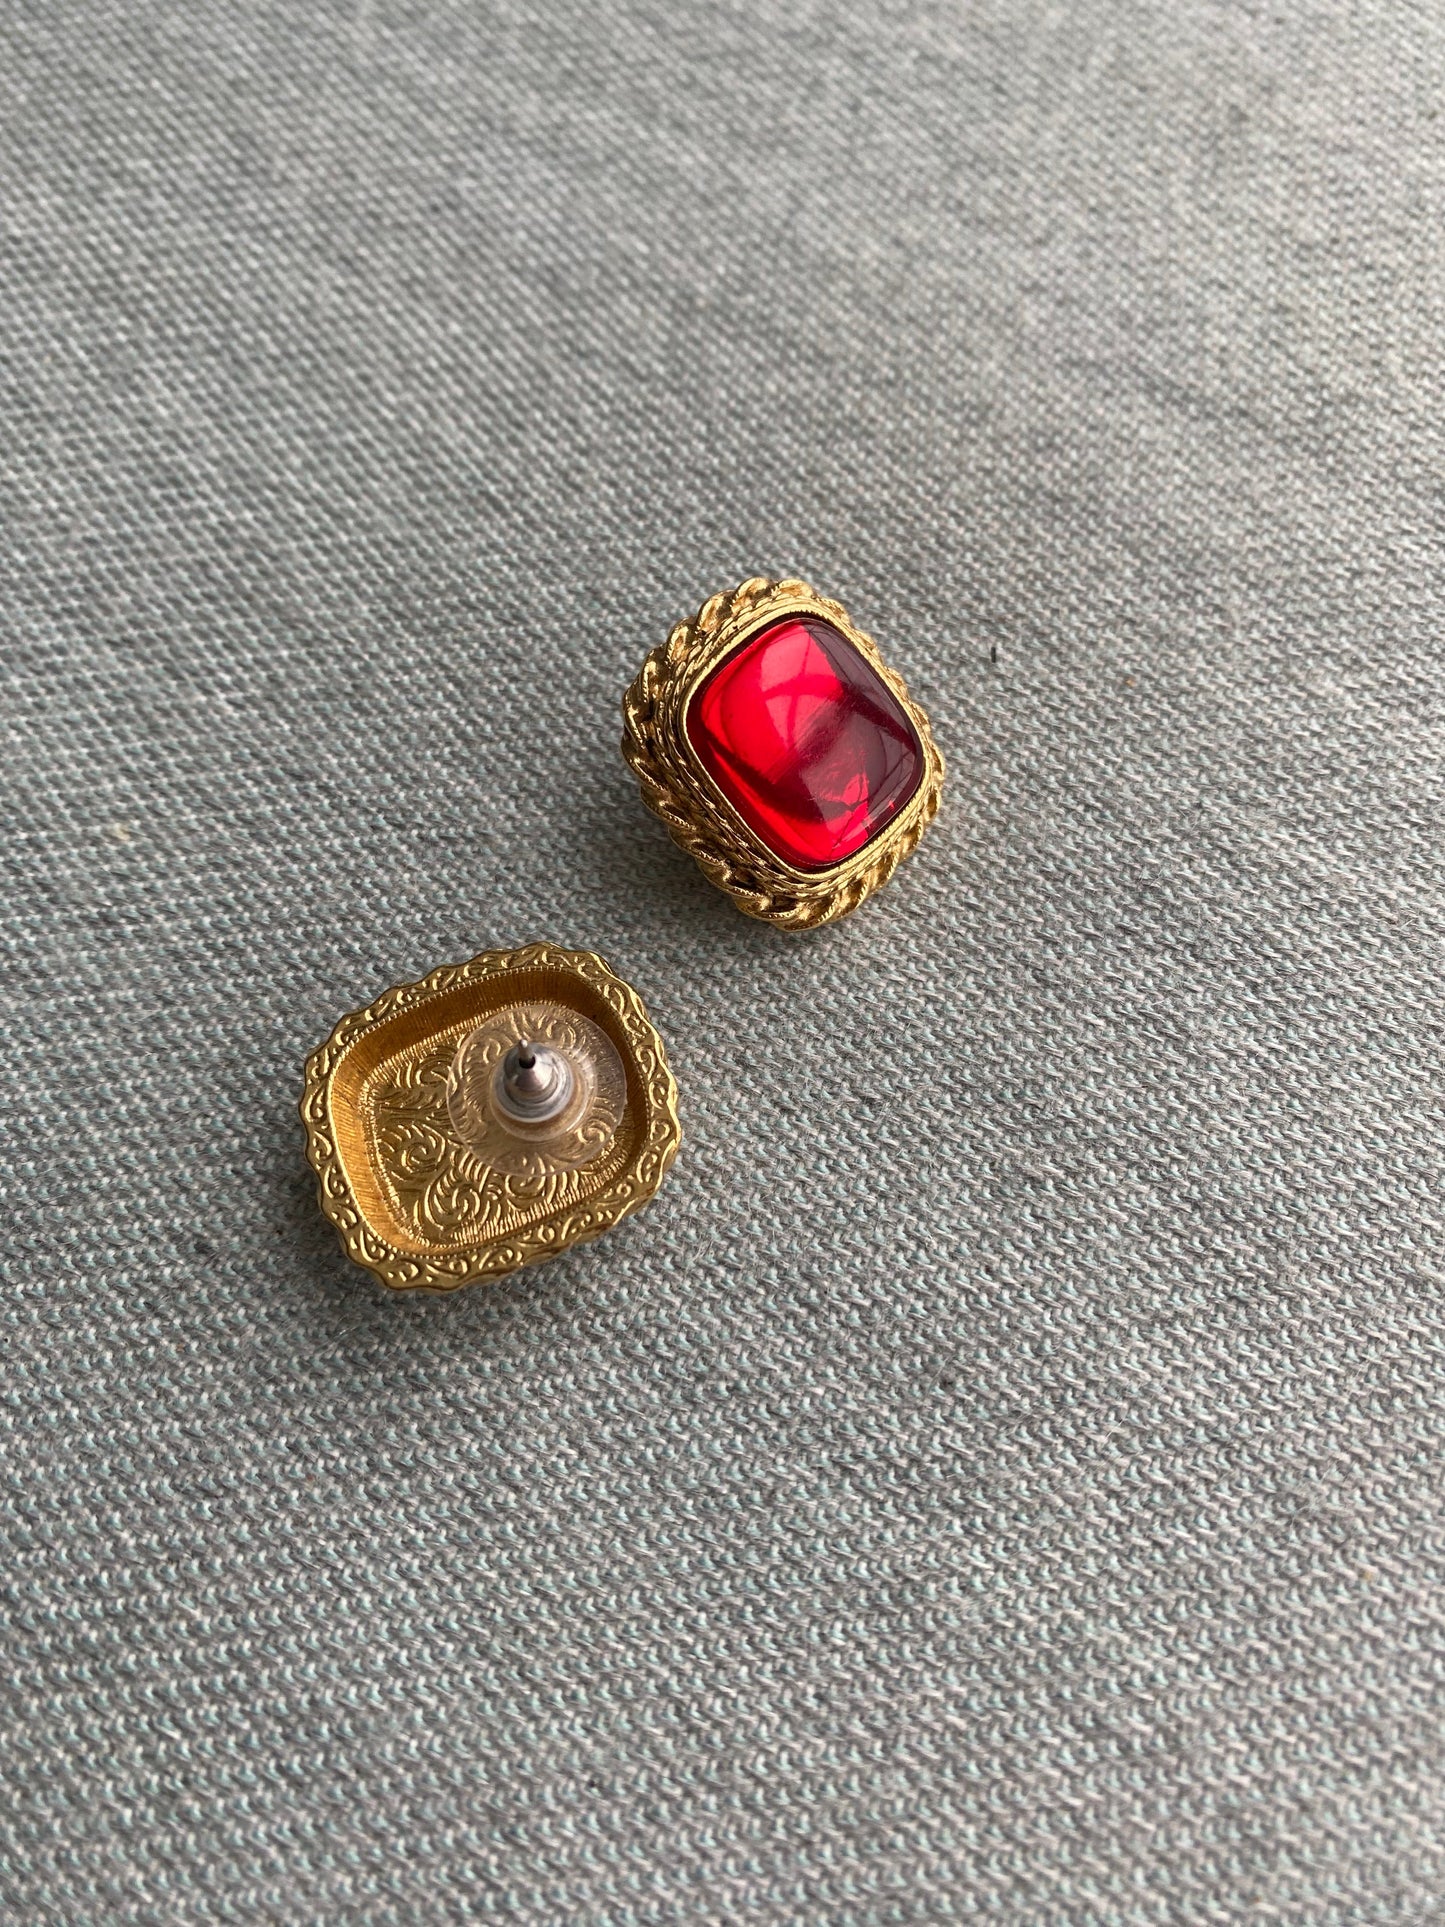 80's Ruby Square Cabachon Gold Rope Pierced Earrings